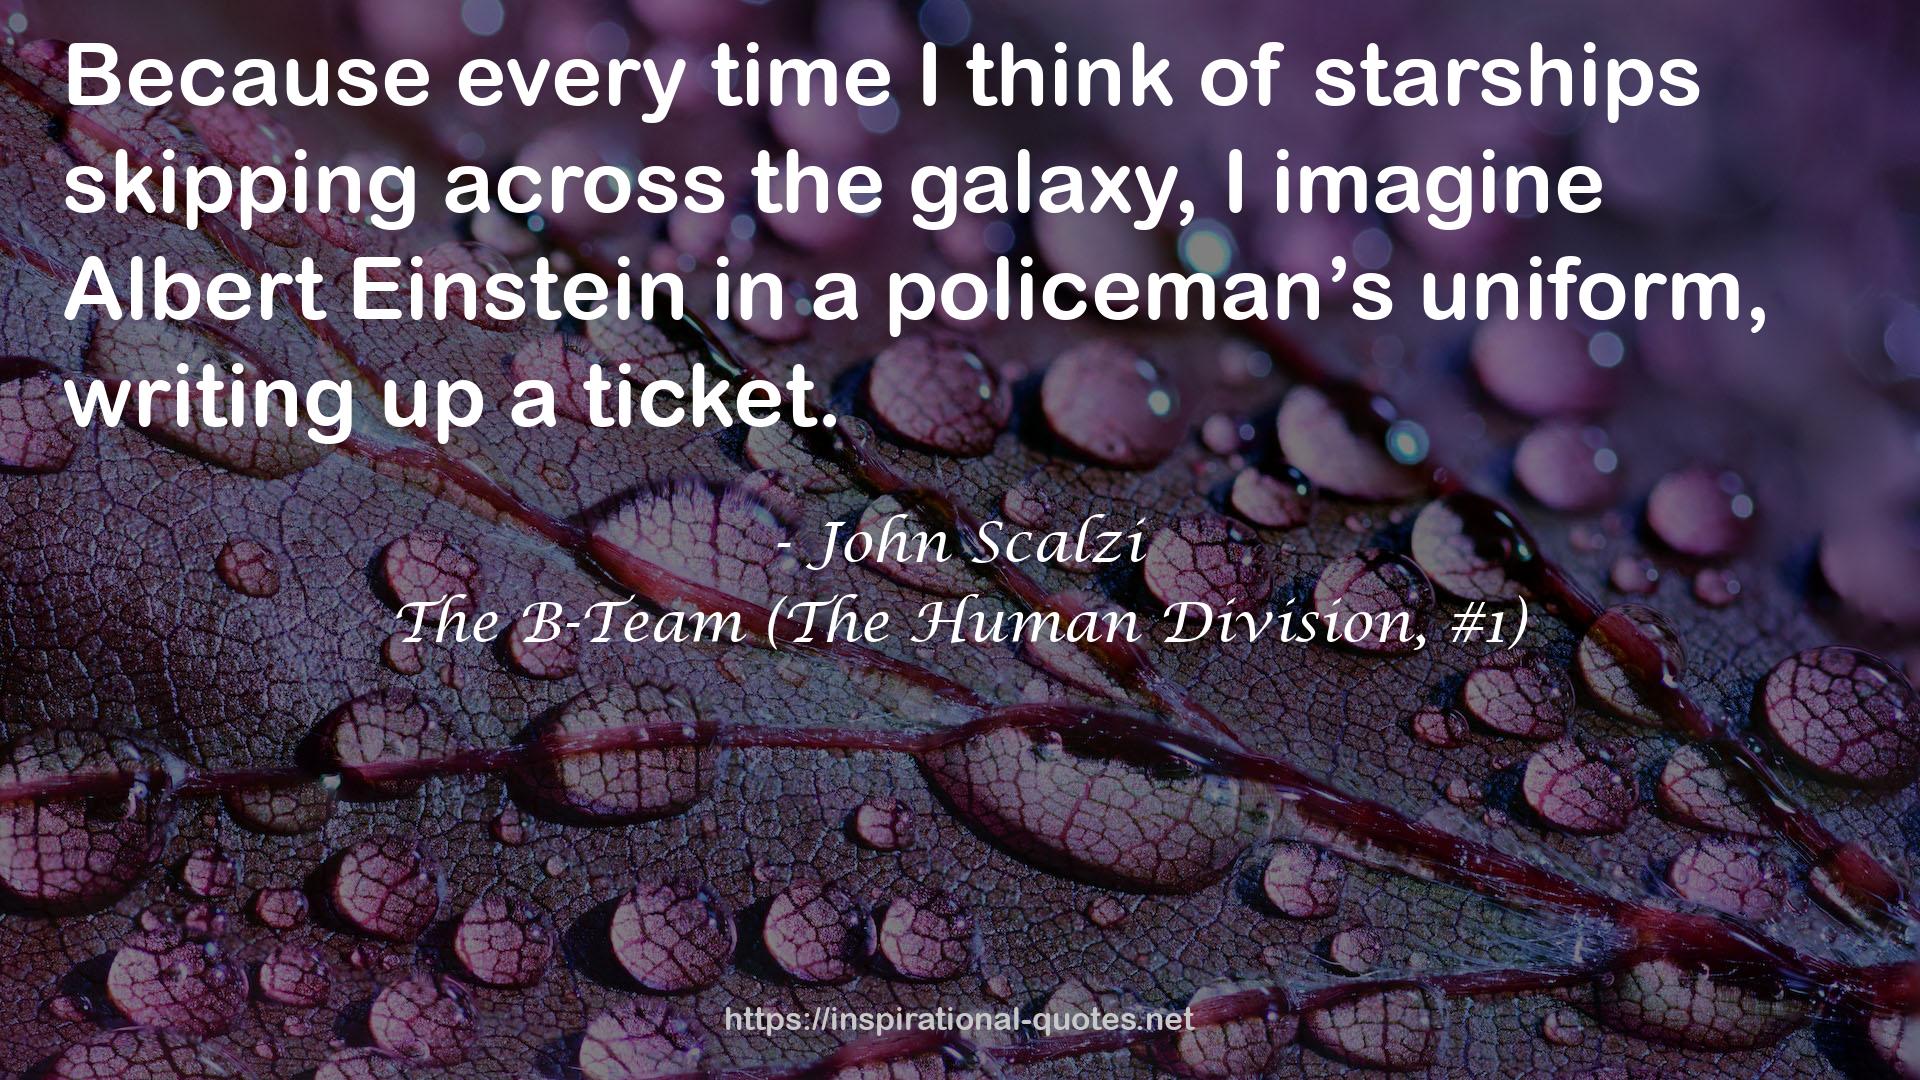 The B-Team (The Human Division, #1) QUOTES